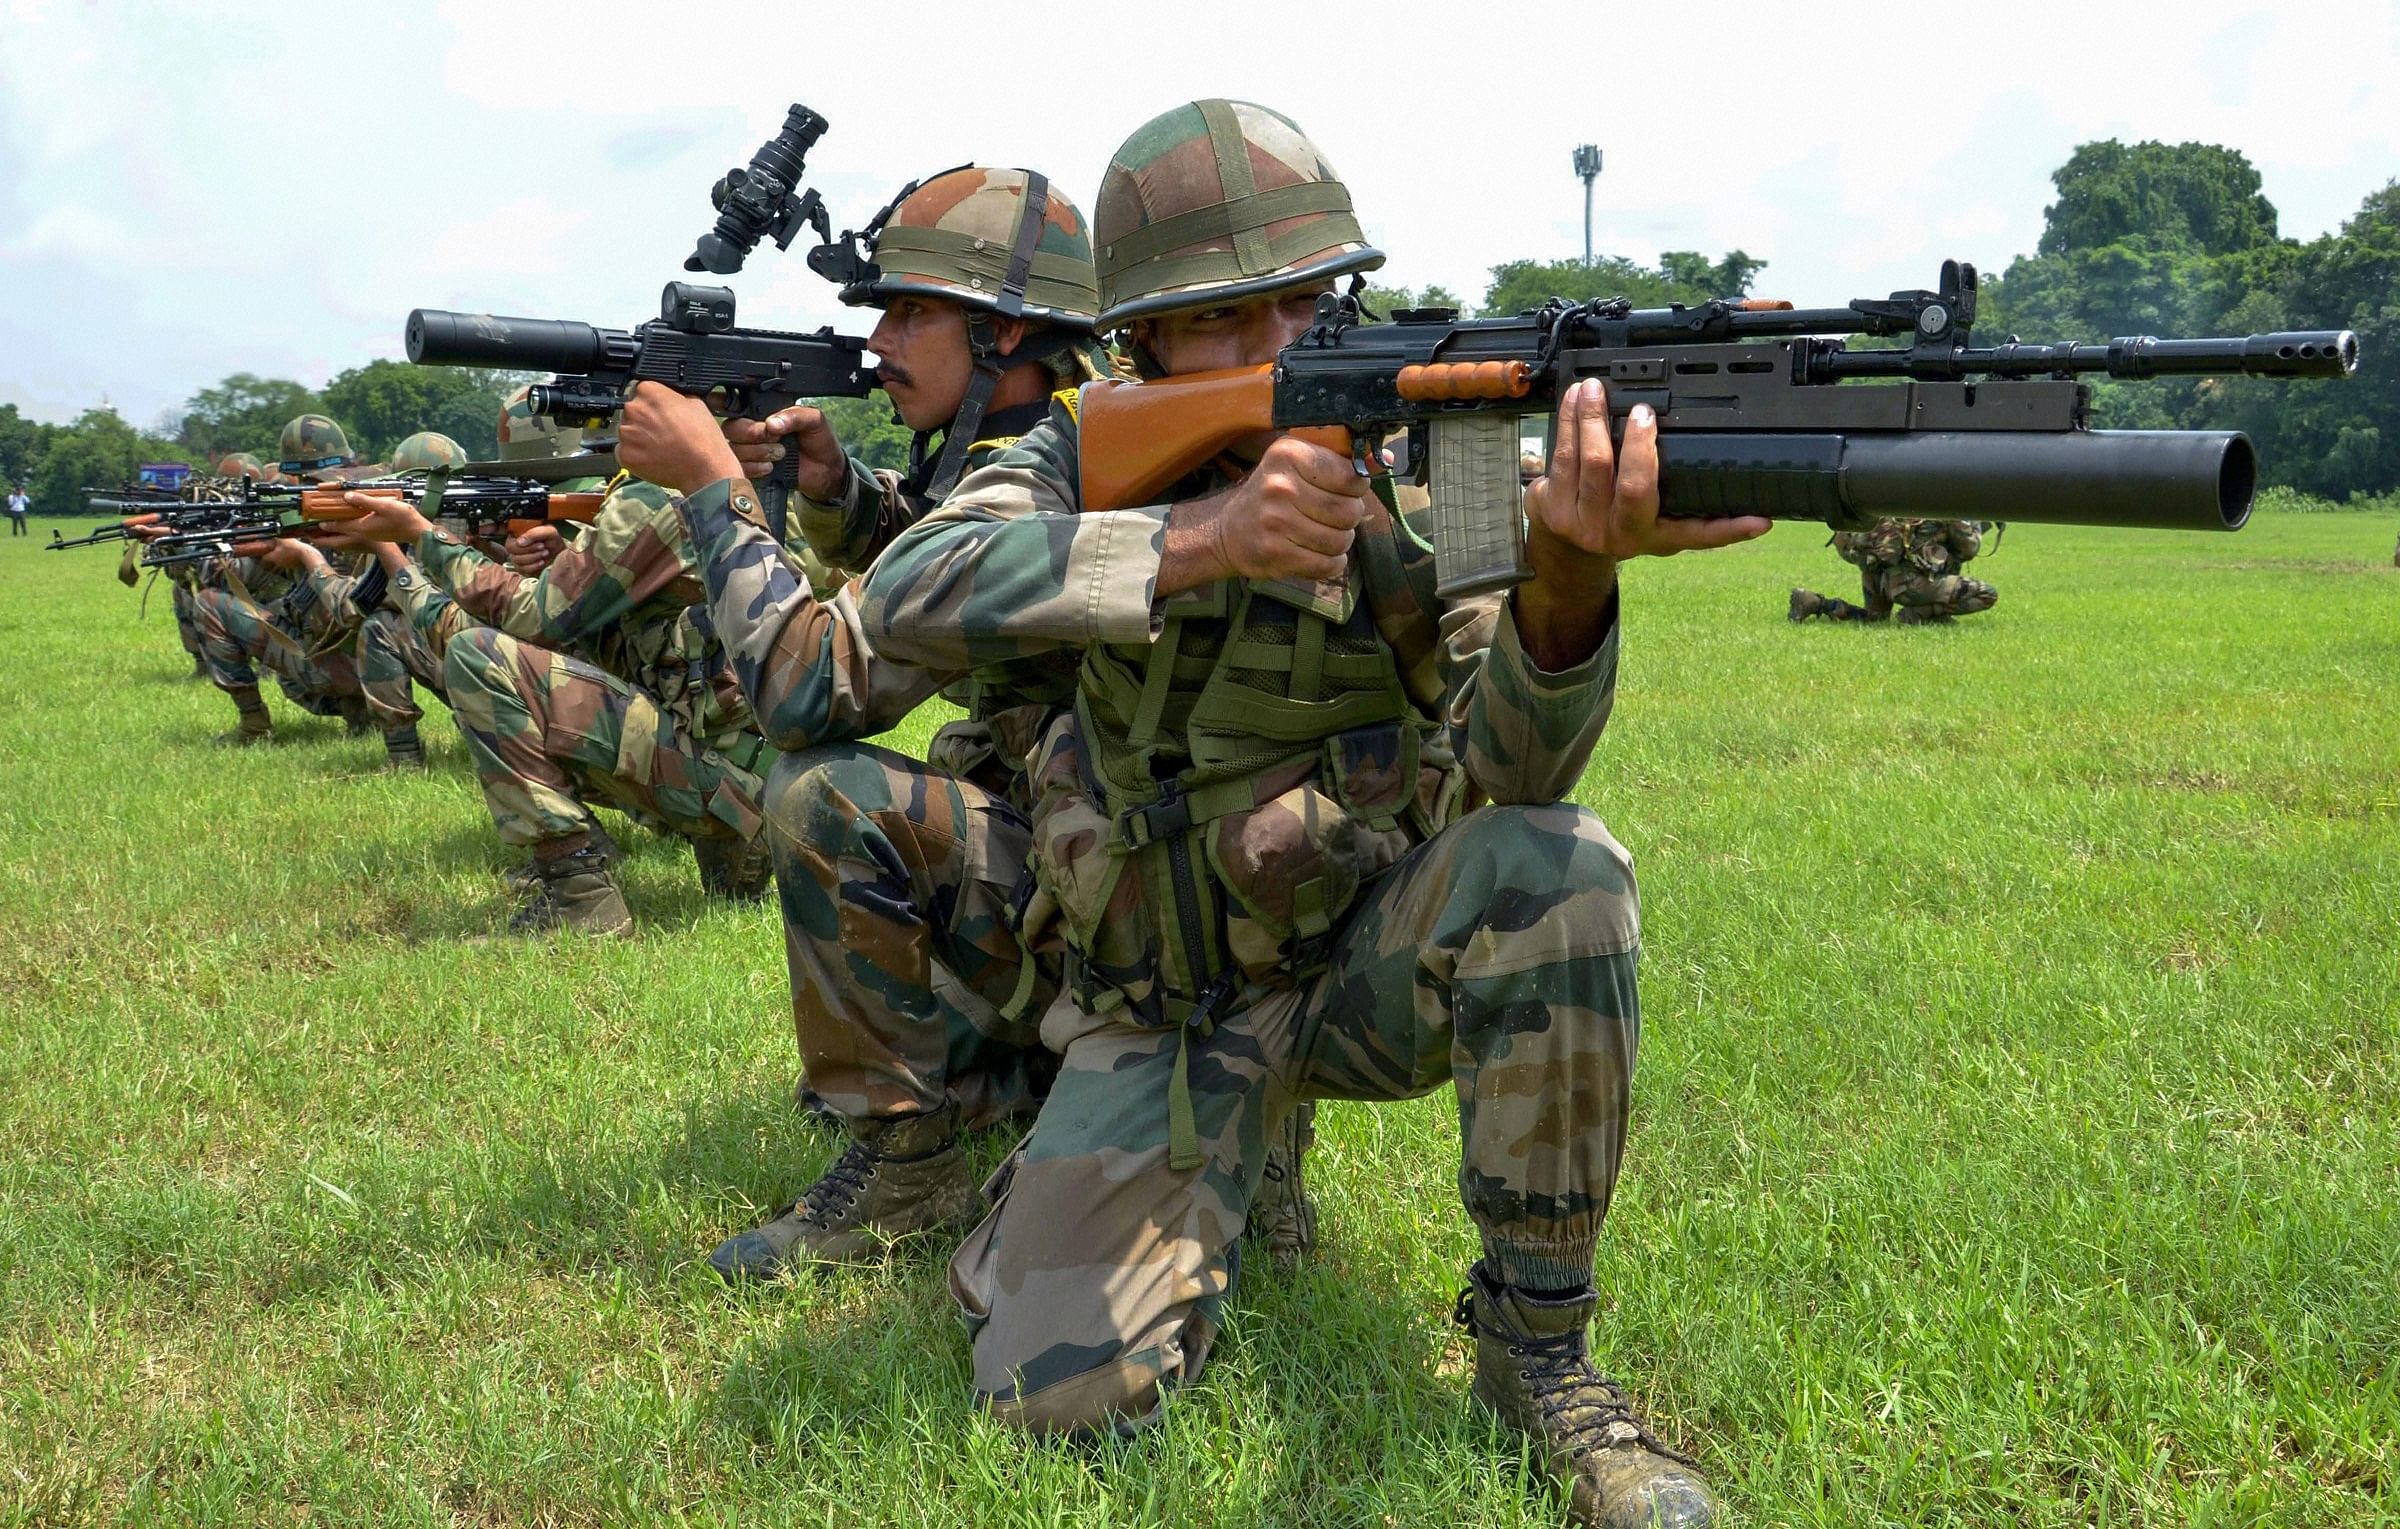 Last week the army issued a fresh RFI to buy 6.5 lakh assault rifles of the lower caliber of 7.62 x 39 mm with a minimum range of 300 mt. This means these rifles would be having a lesser firing range and a different barrel from the ones that would be purchased from abroad. It cancels the previous RFI. PTI file photo